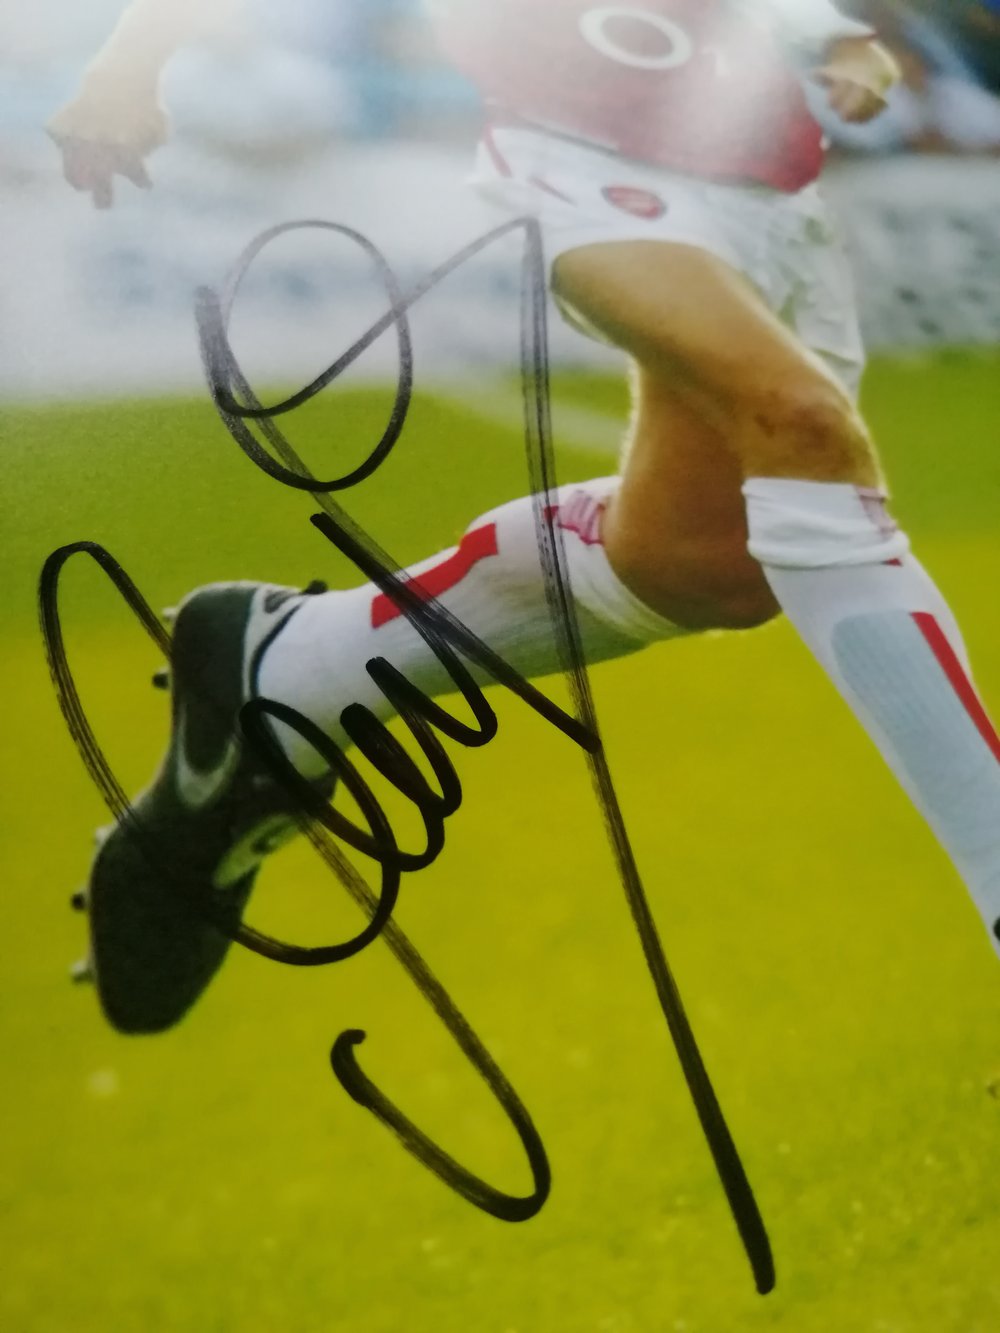 Arsenal Legend Ray Parlour Signed 10x8